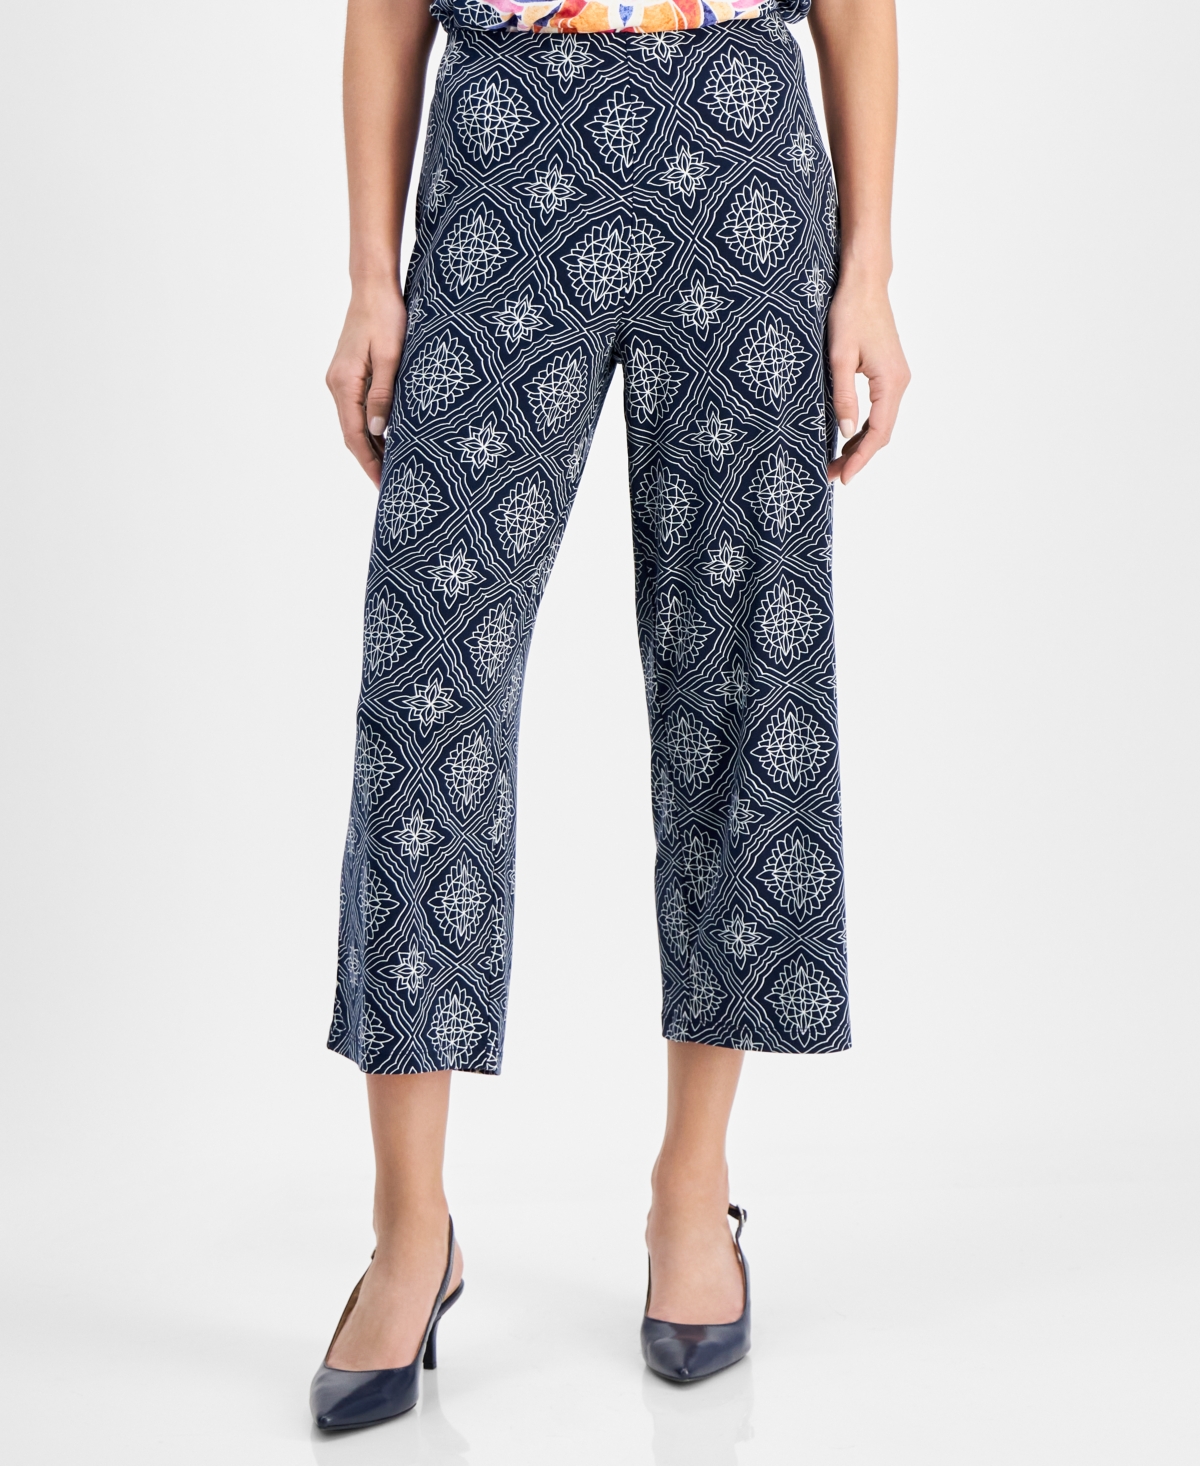 Women's Printed Culotte Pants, Created for Macy's - Intrepid Blue Combo